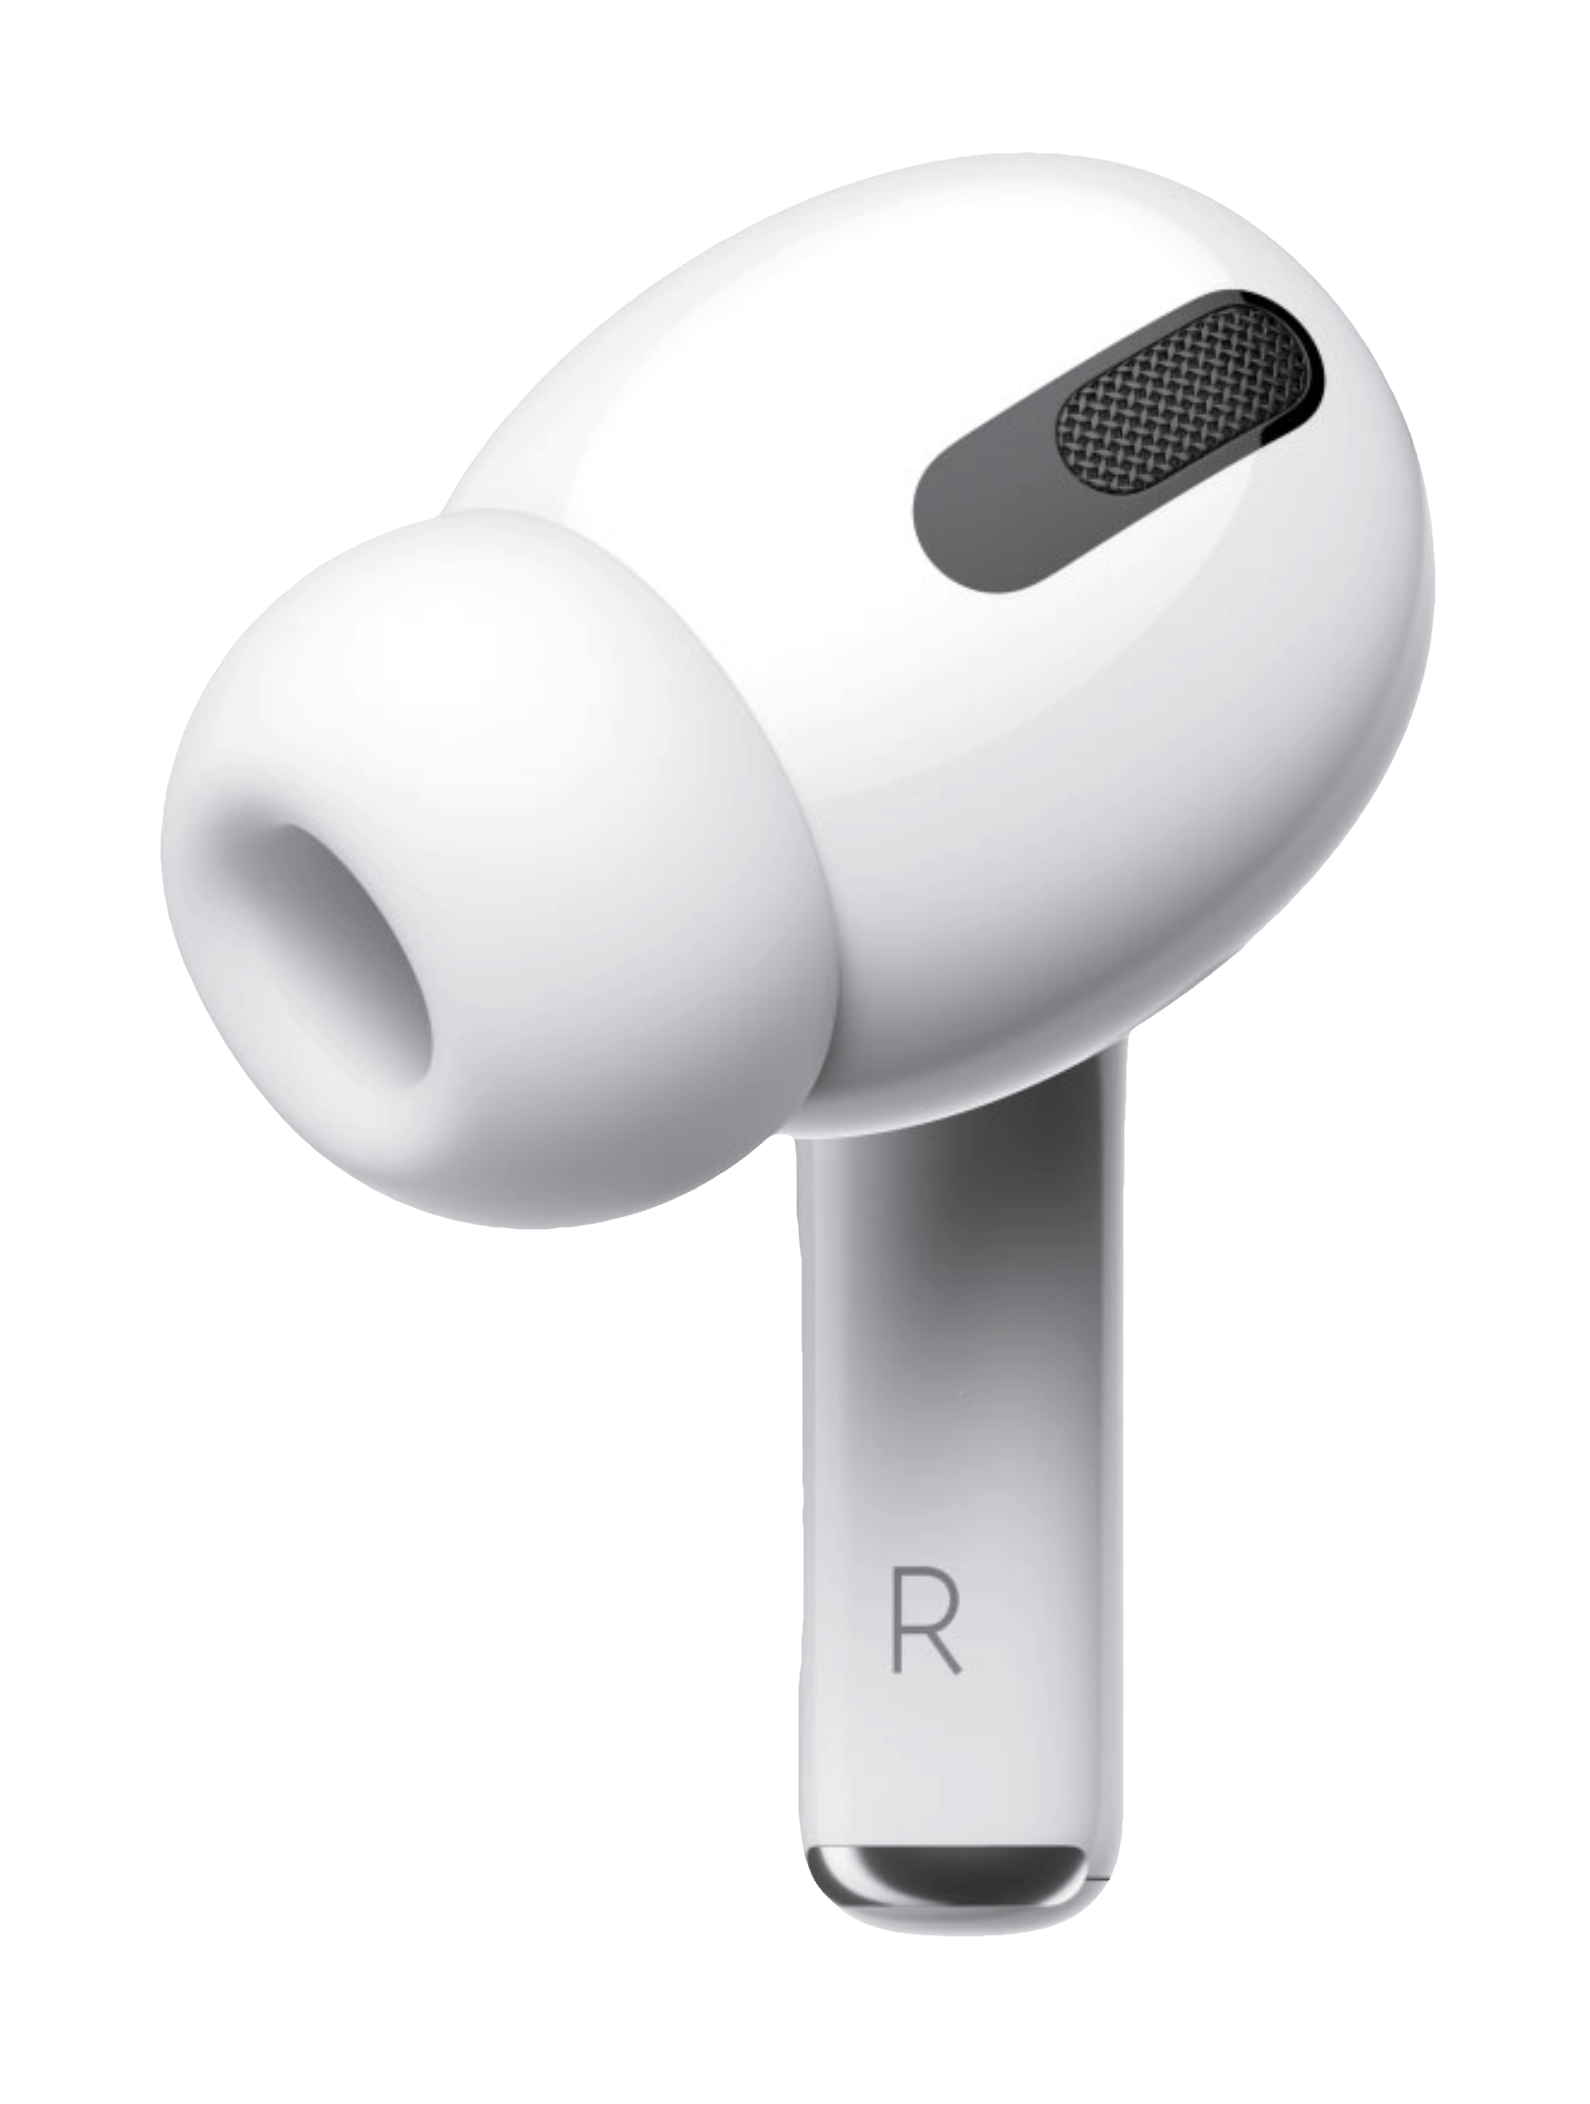 AirPods Pro - The new designs allows them to noise cancel better